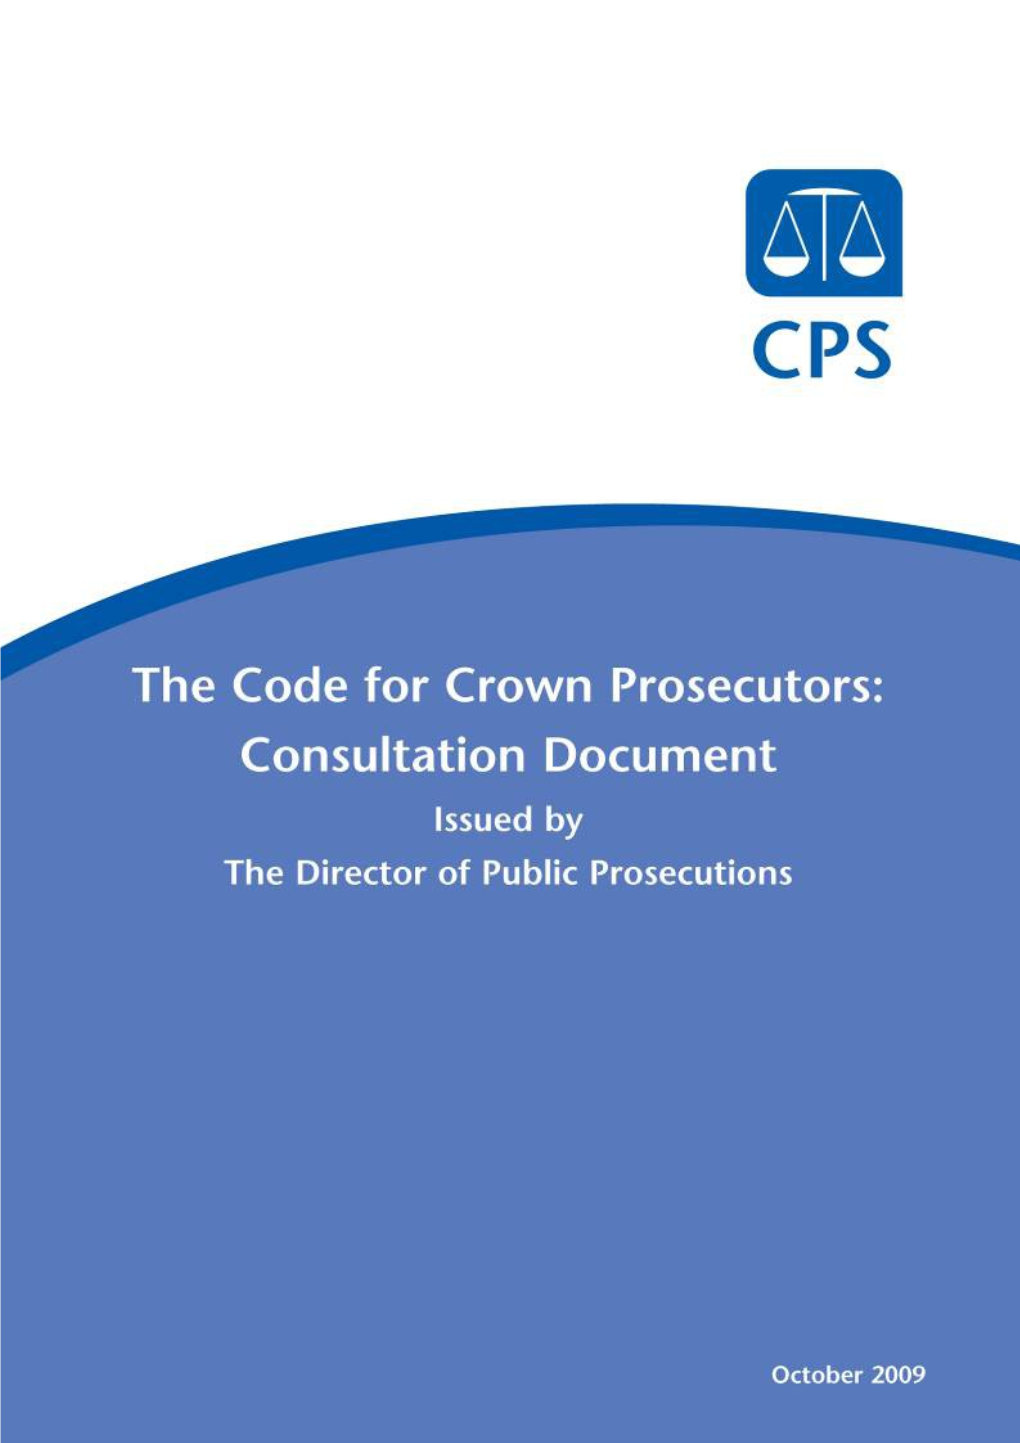 The Code for Crown Prosecutors